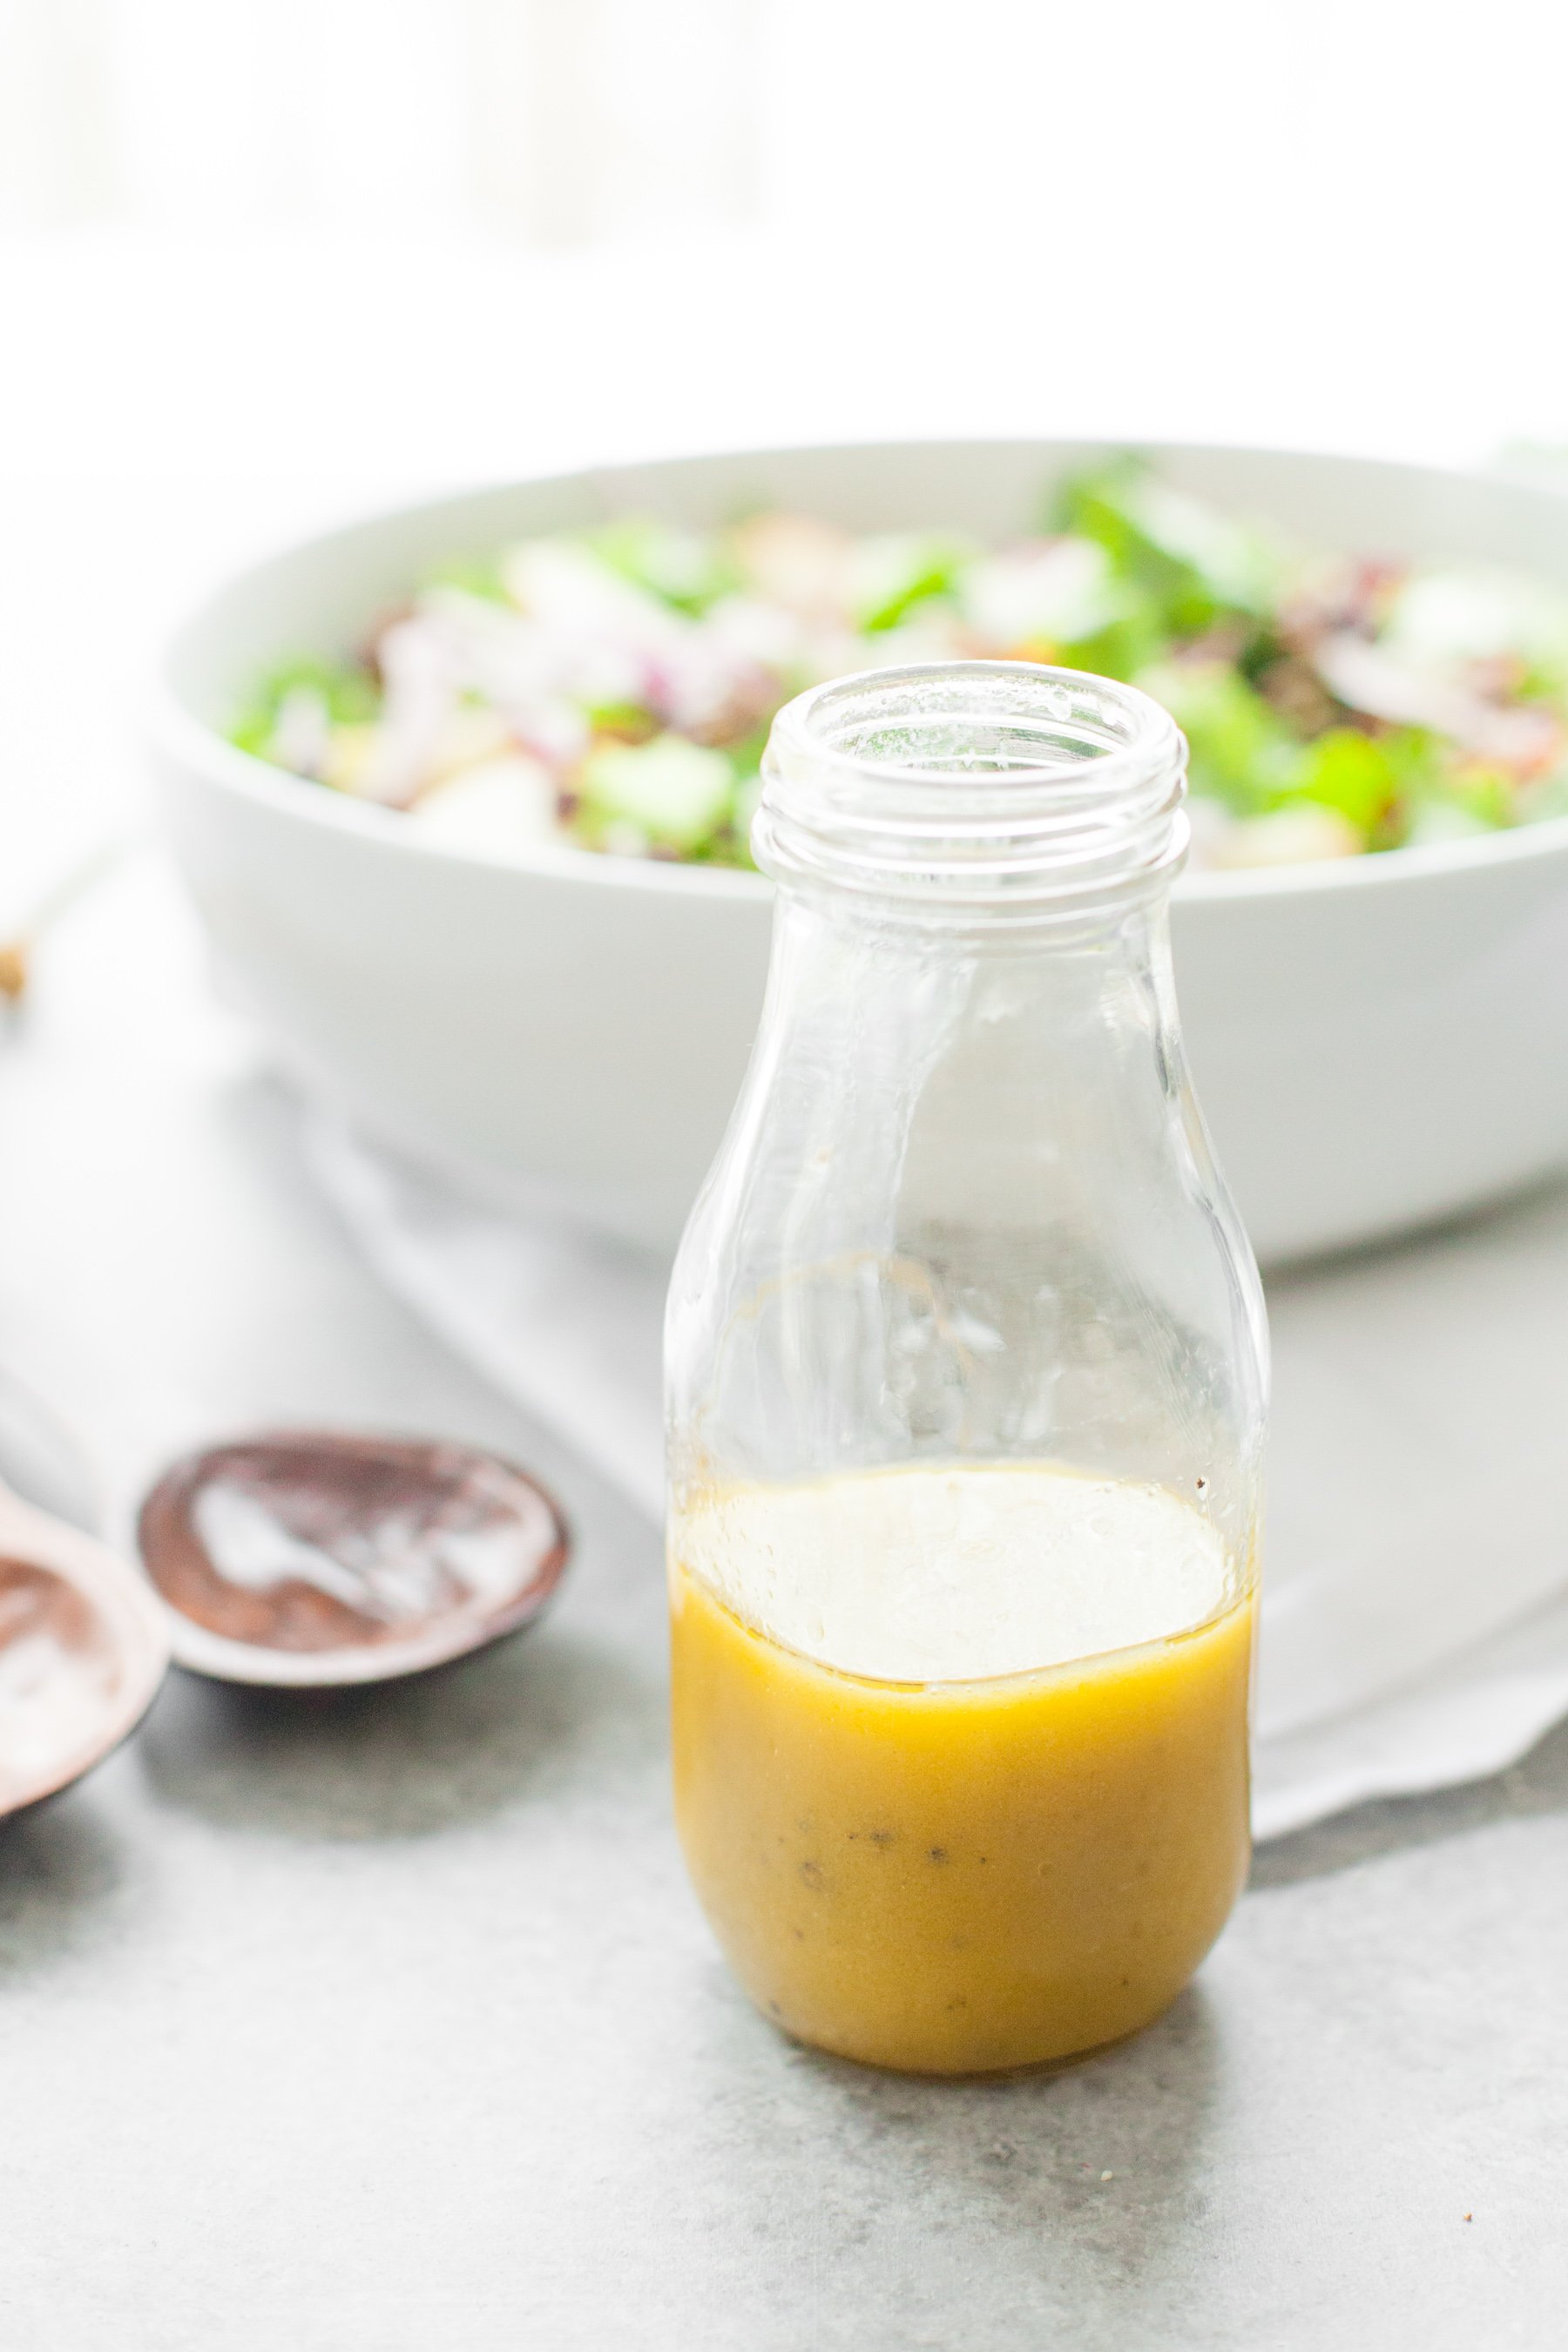 A glass jar with homemade honey mustard vinaigrette stands in front of a full salad bowl ready for dressing.